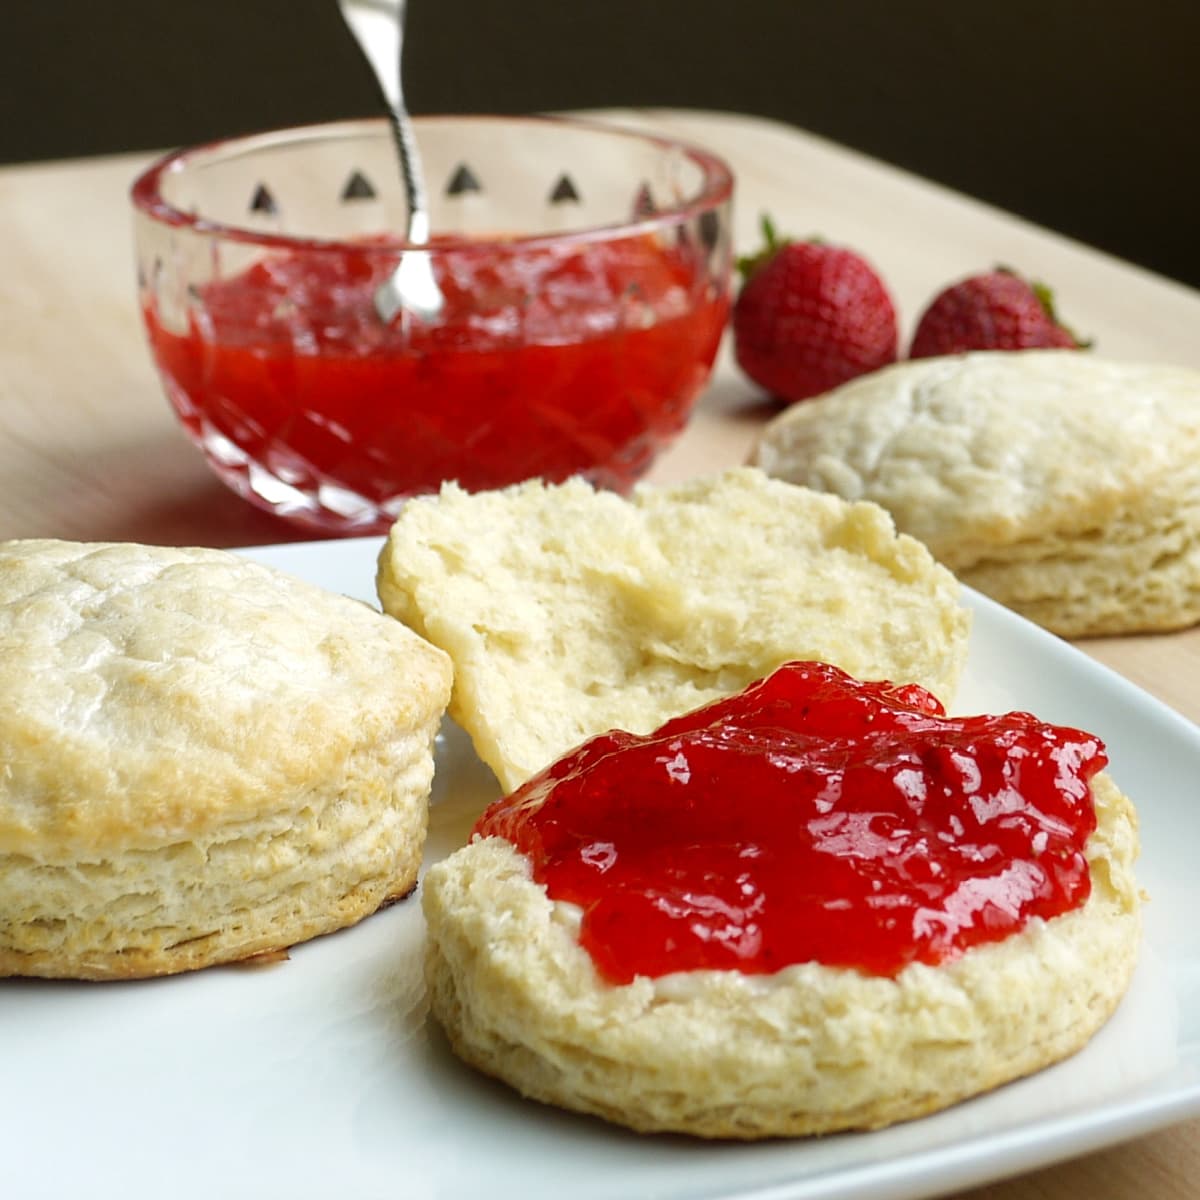 Biscuits and strawberry jam, with a small glass bowl of jam in the background.